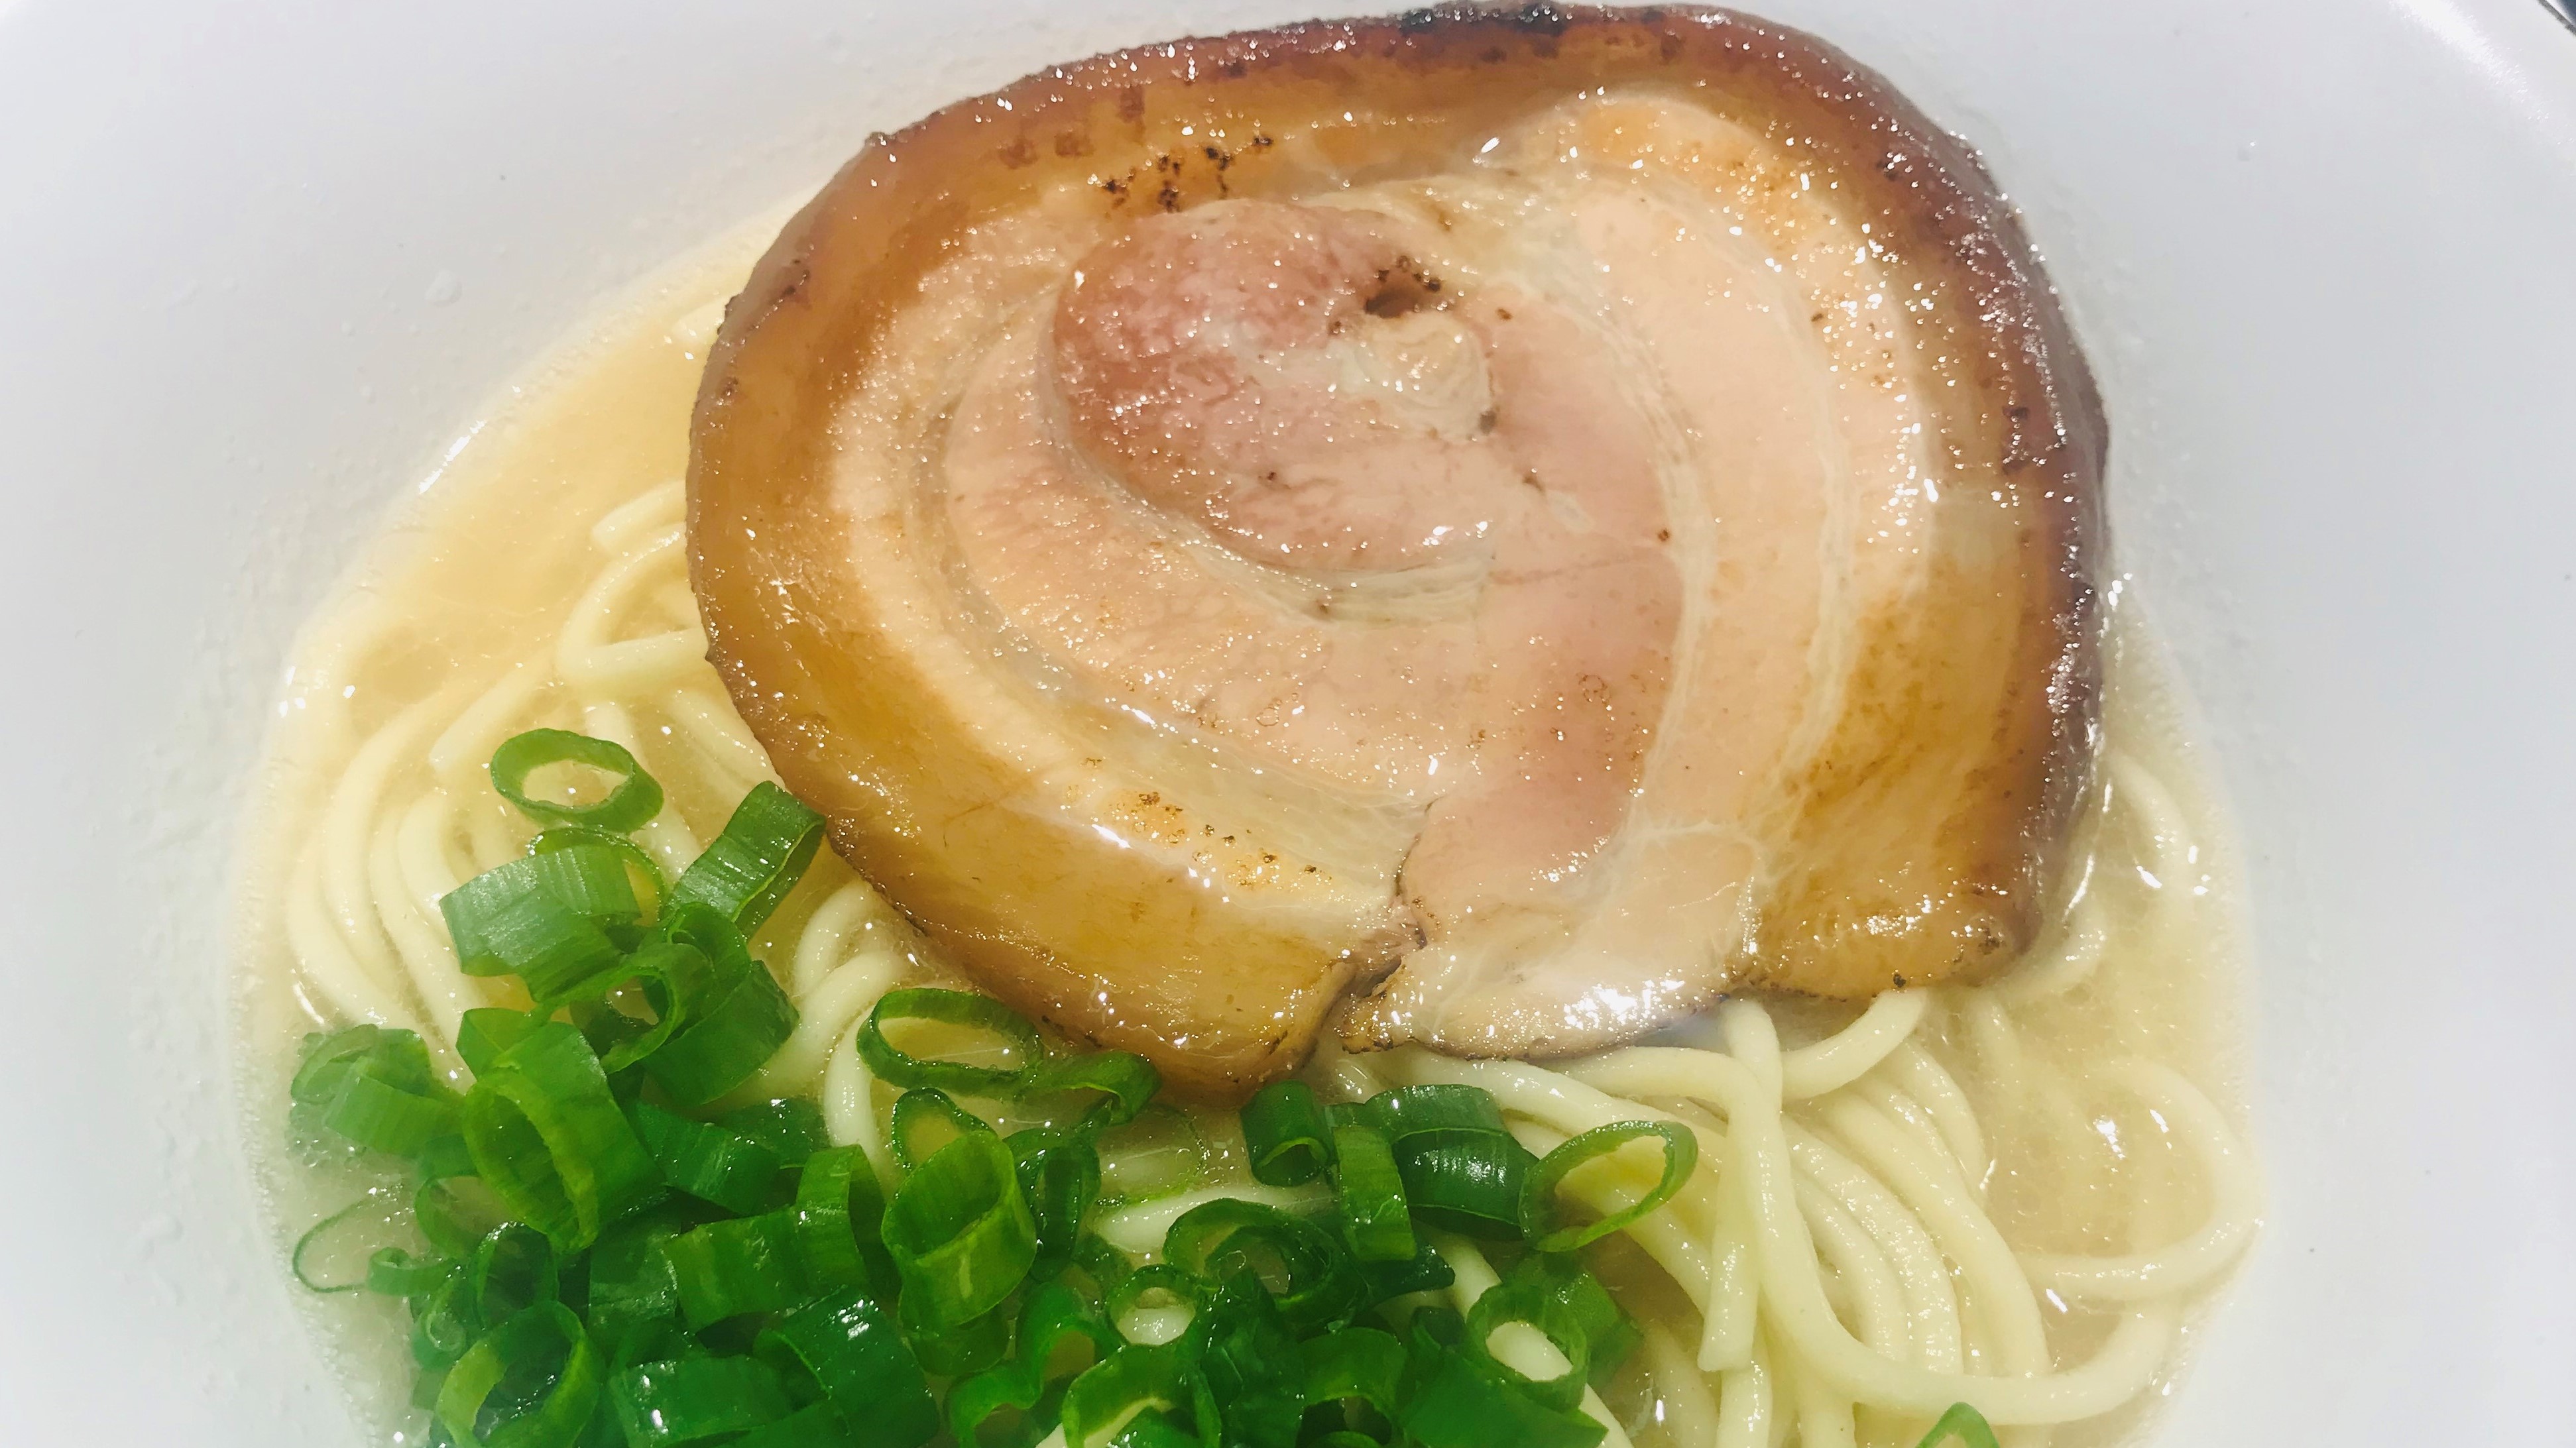 Top view of a bowl of ramen with pork belly, scallions, and noodles